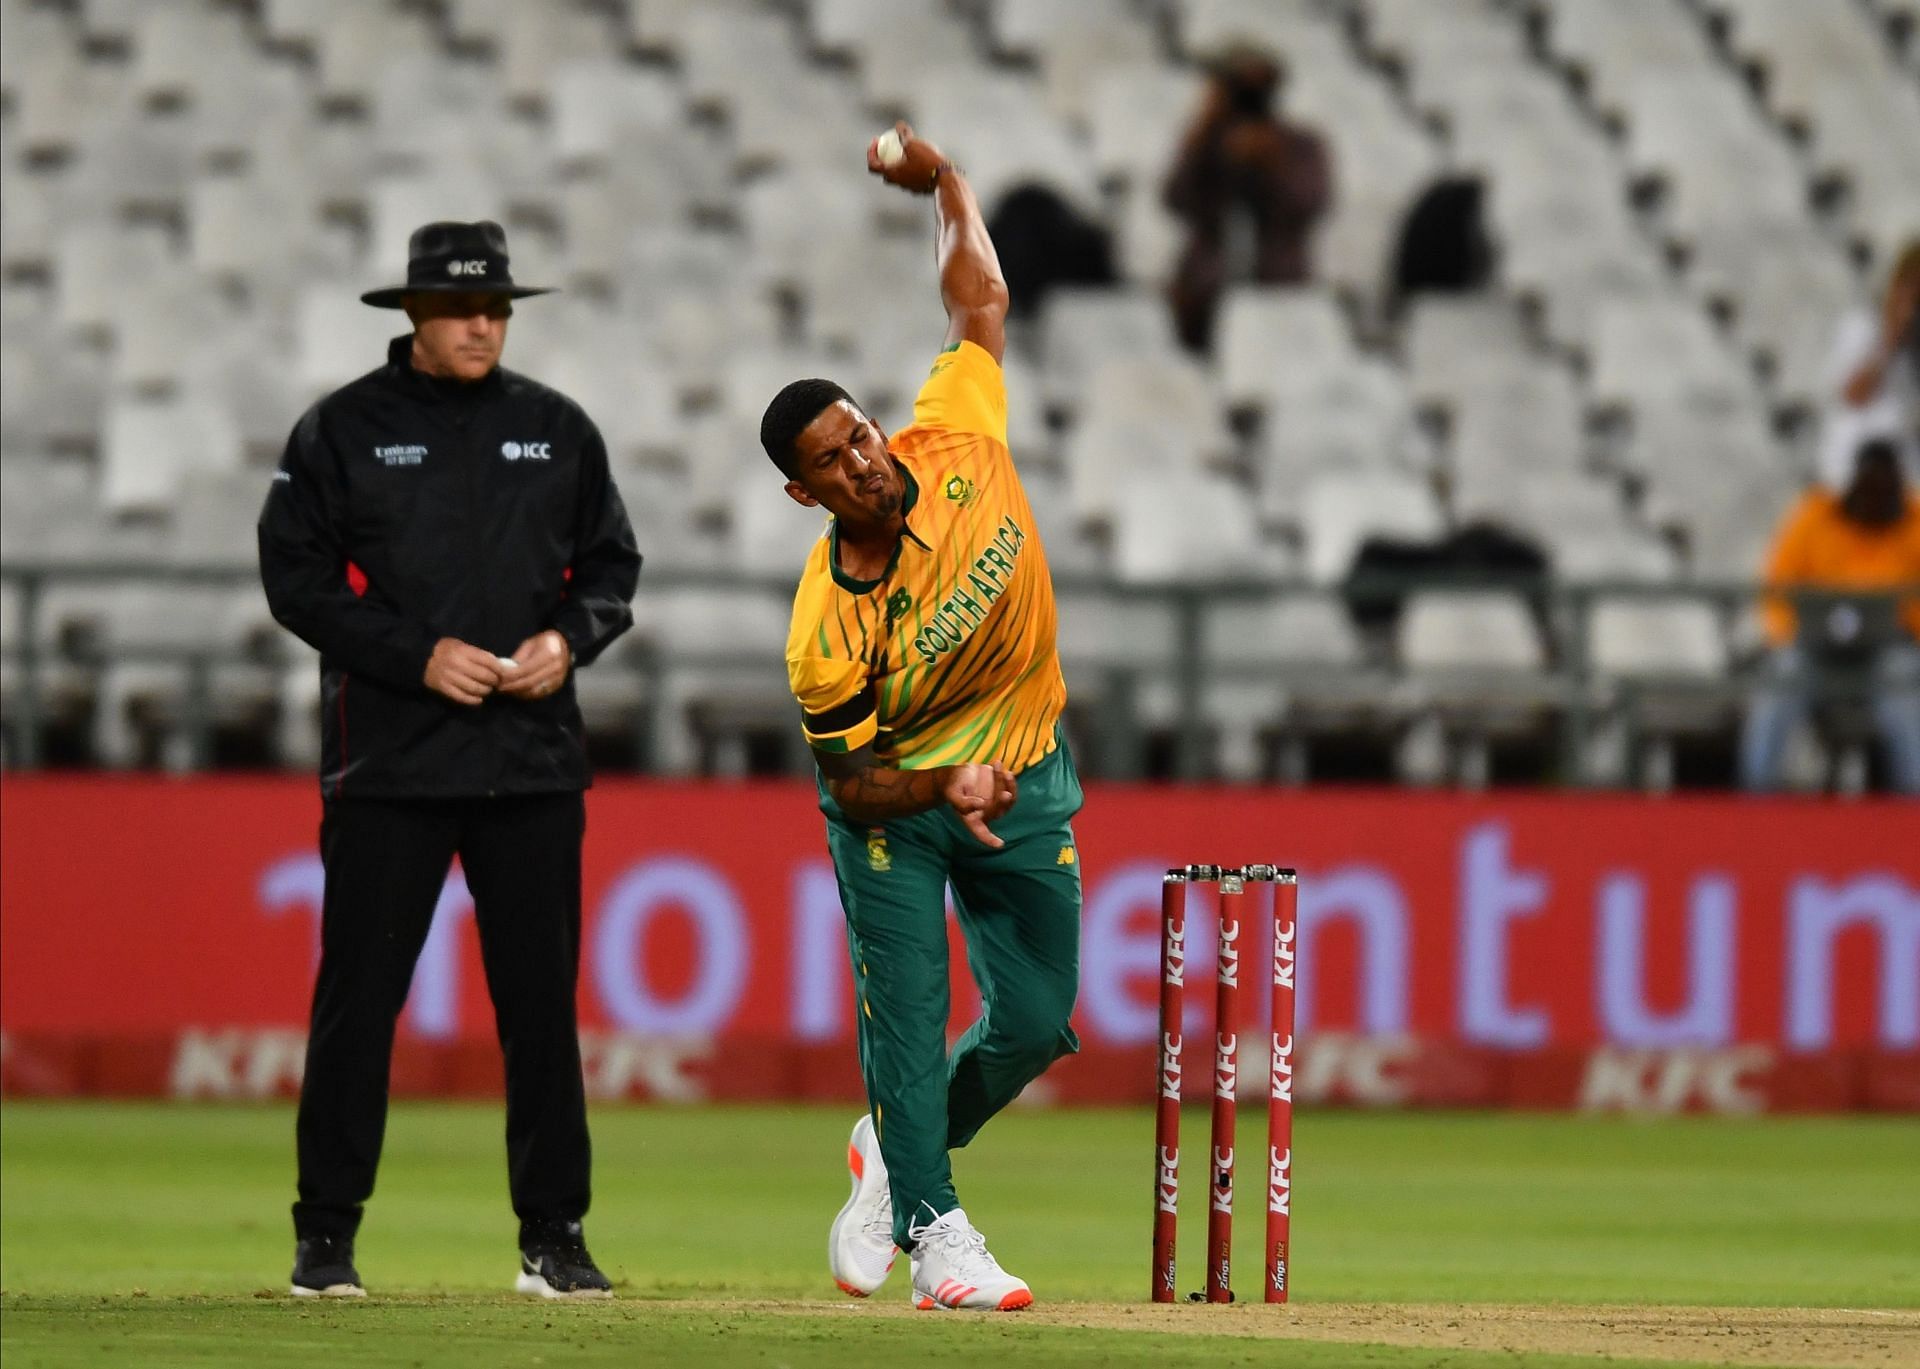 Beuran Hendricks represents Western Province in the CSA T20 Challenge 2022